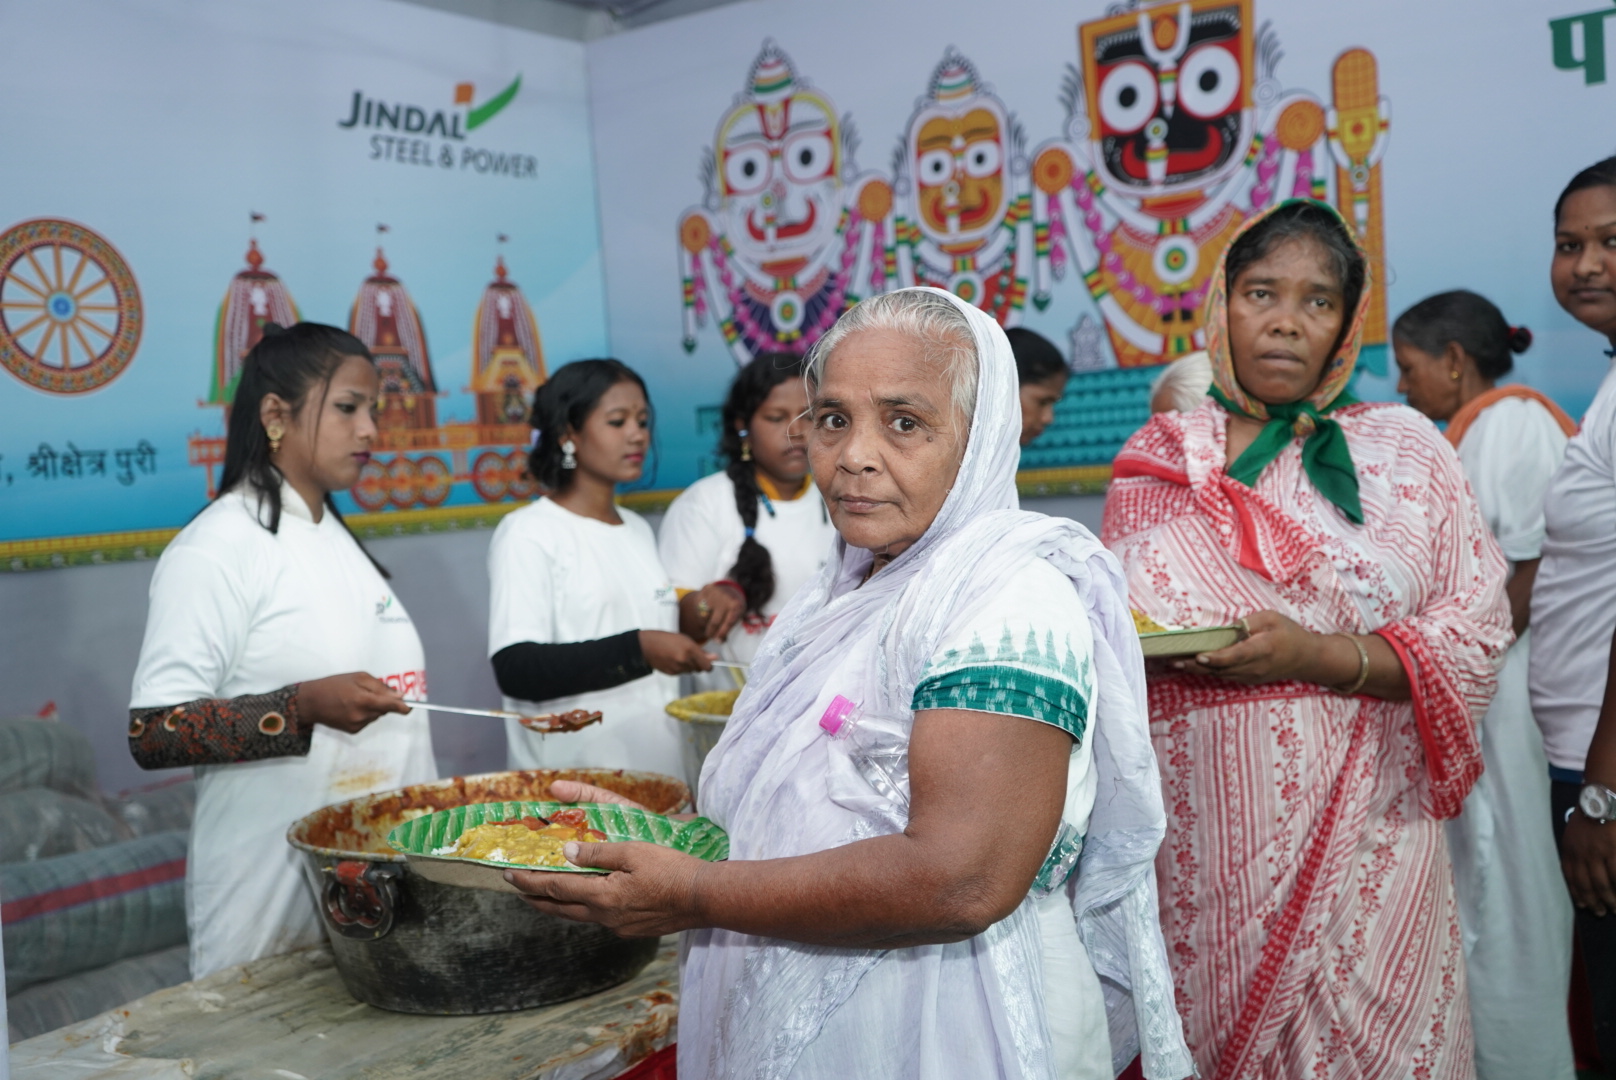 JSP Foundation continues serve devotees with free meal during the Rath Yatra at Puri